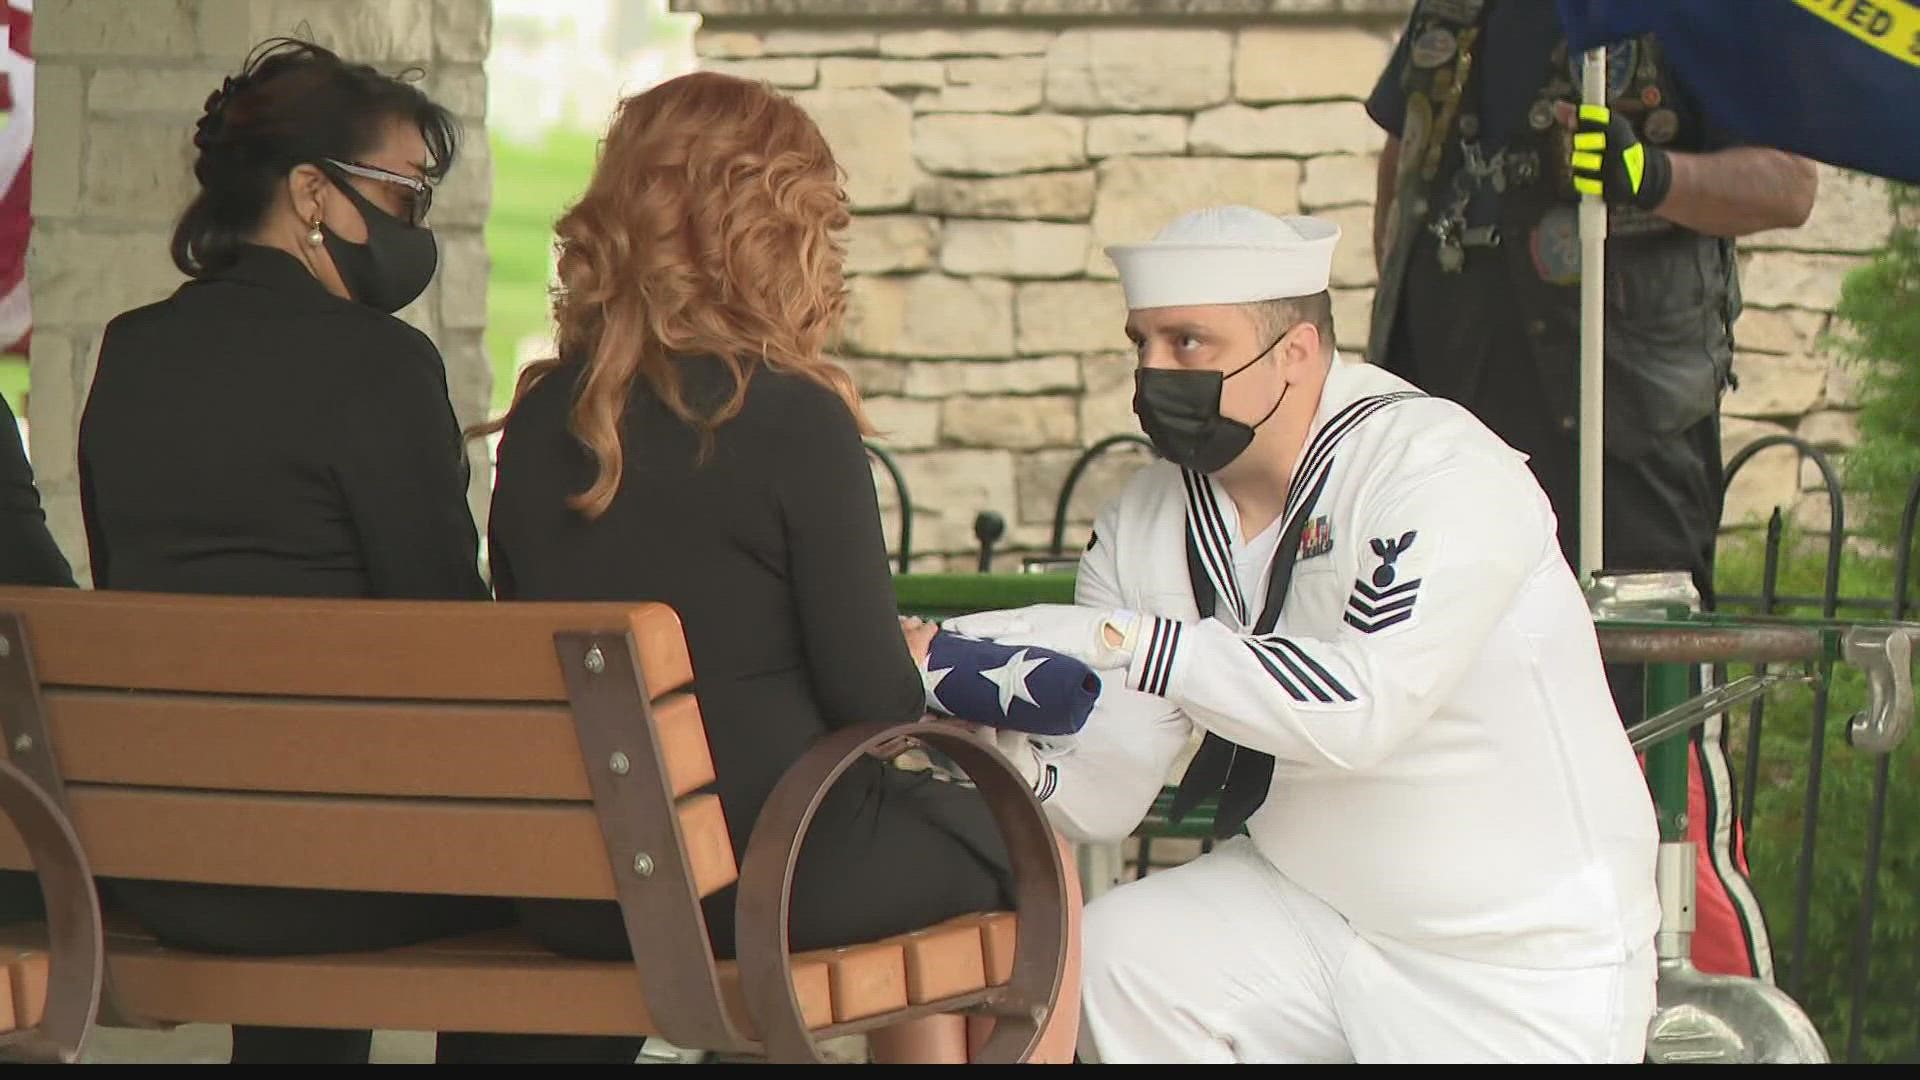 St. Louis veterans and the BJC community came together to pay respects to a Vietnam veteran with no known loved ones.